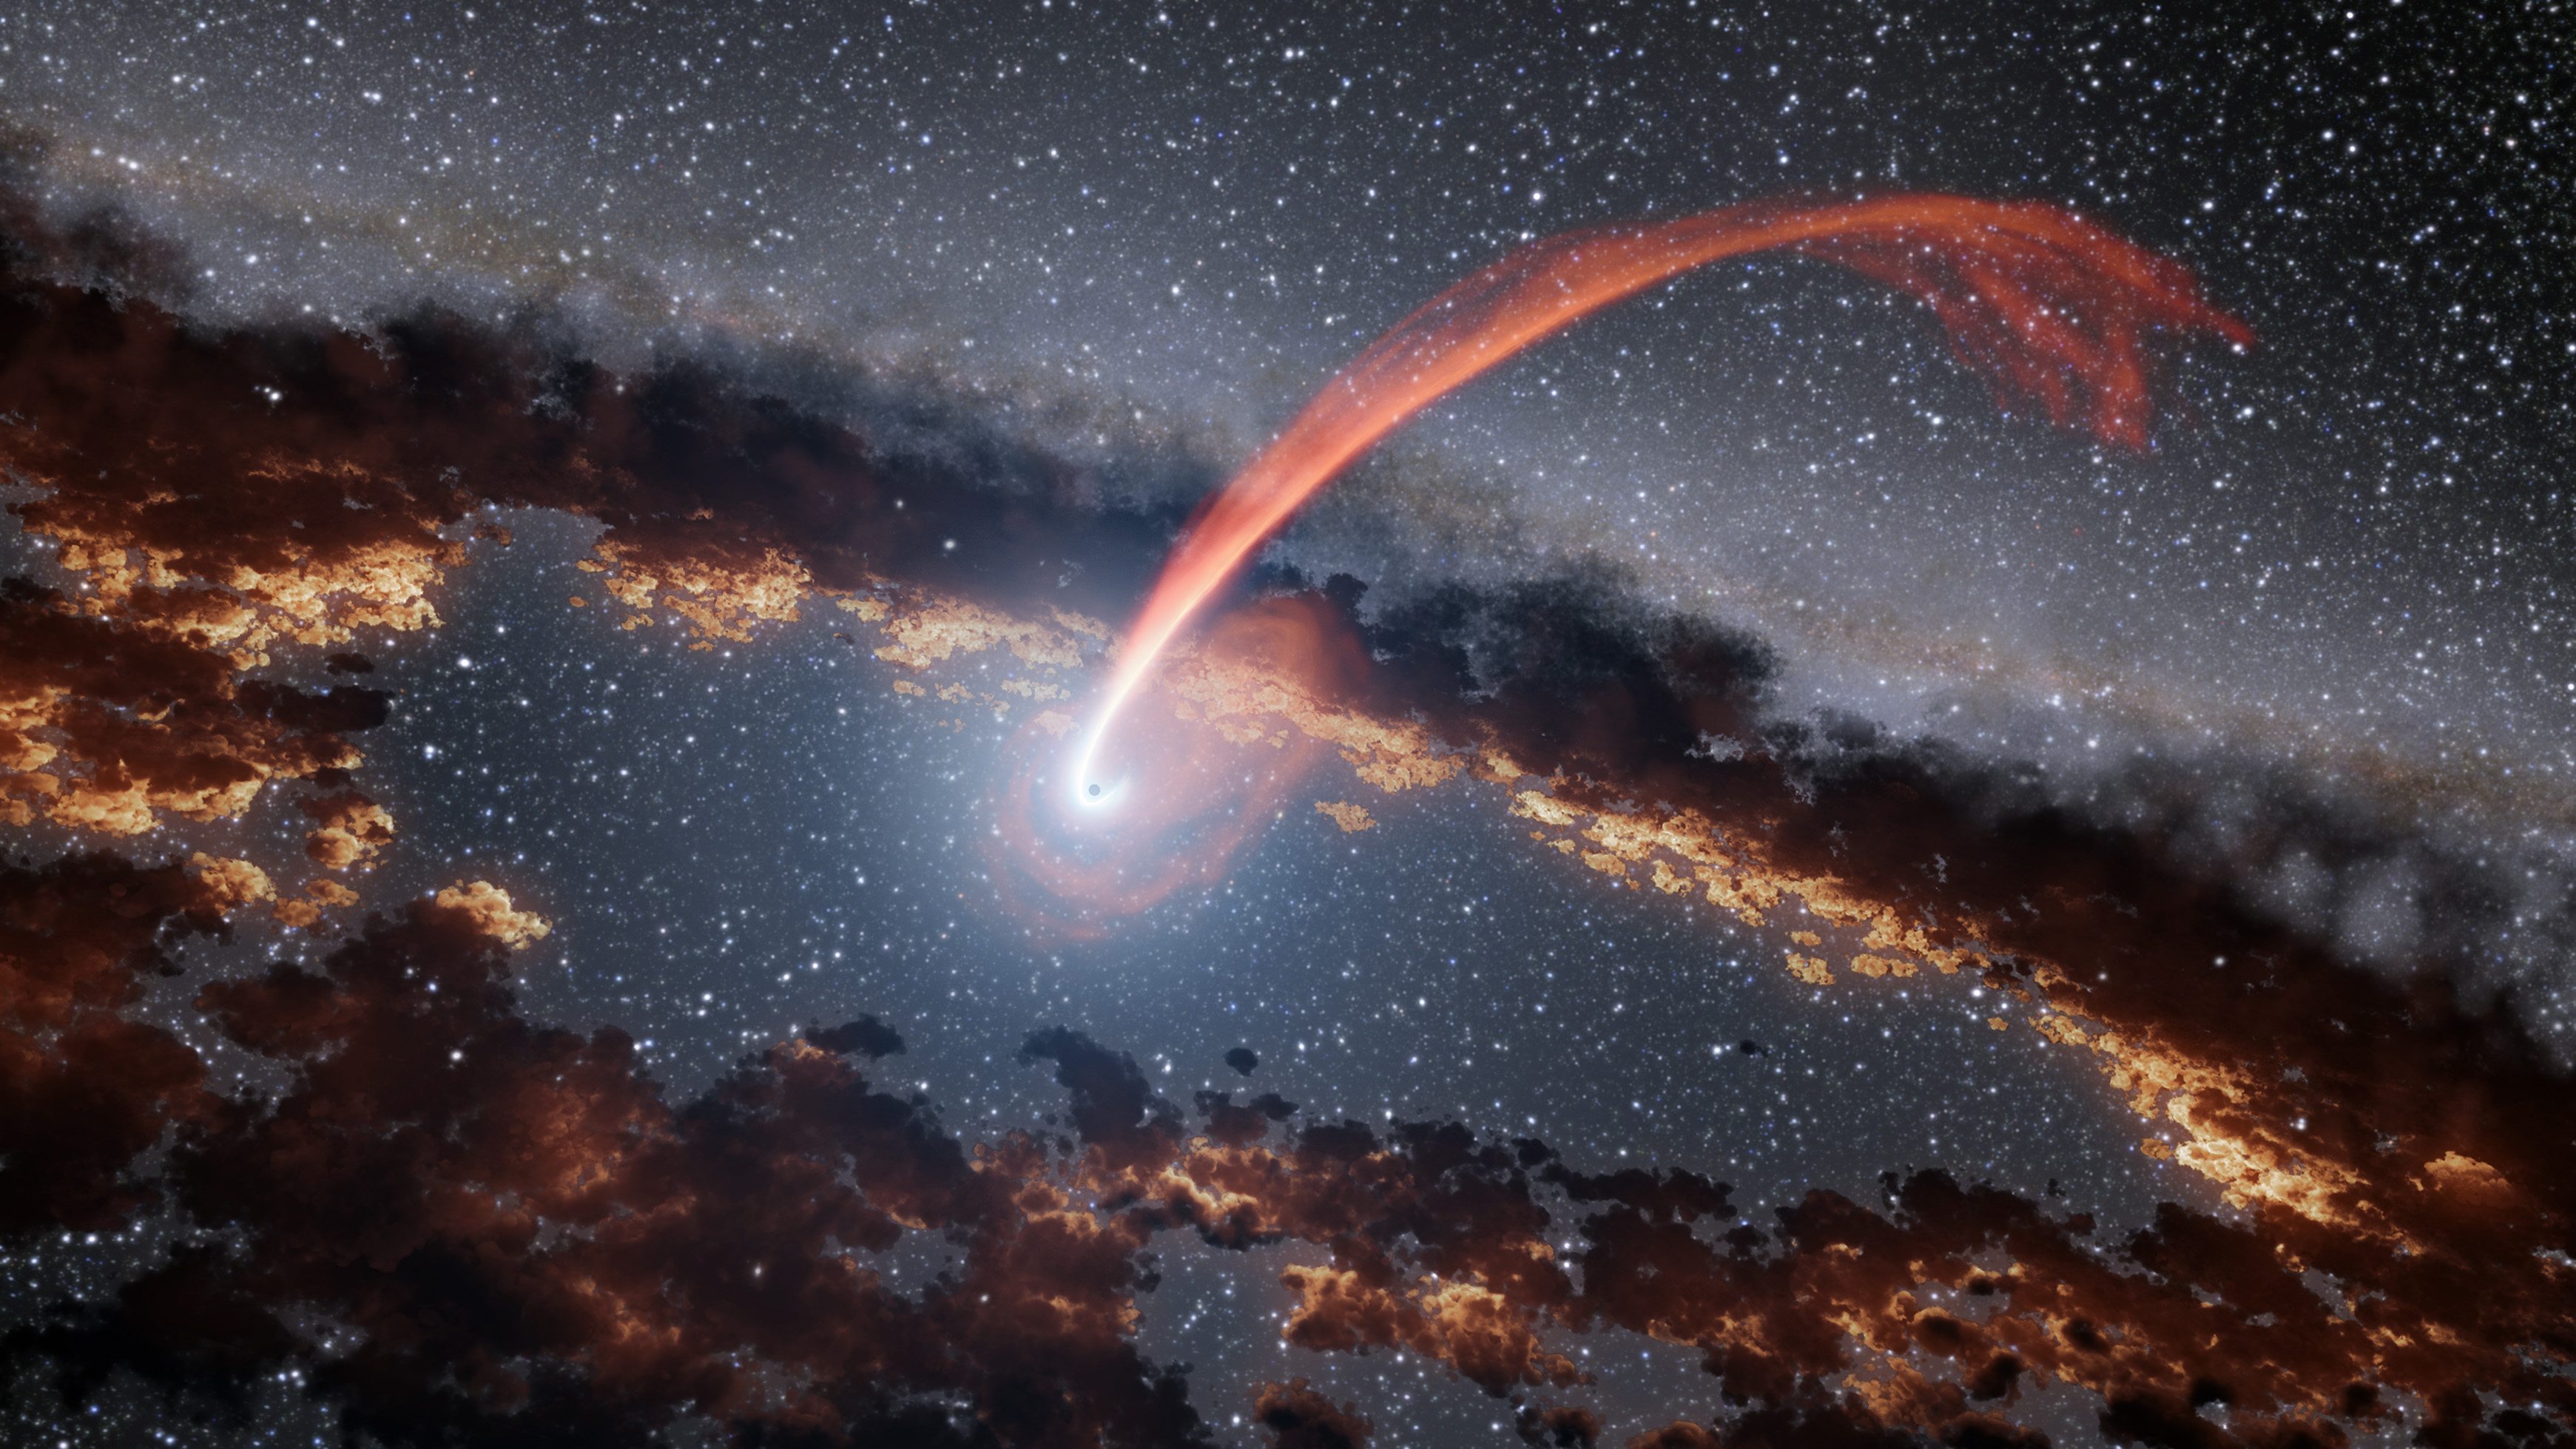 Image credit: NASA. This illustration shows a glowing stream of material from a star, disrupted as it was being devoured by a supermassive black hole.